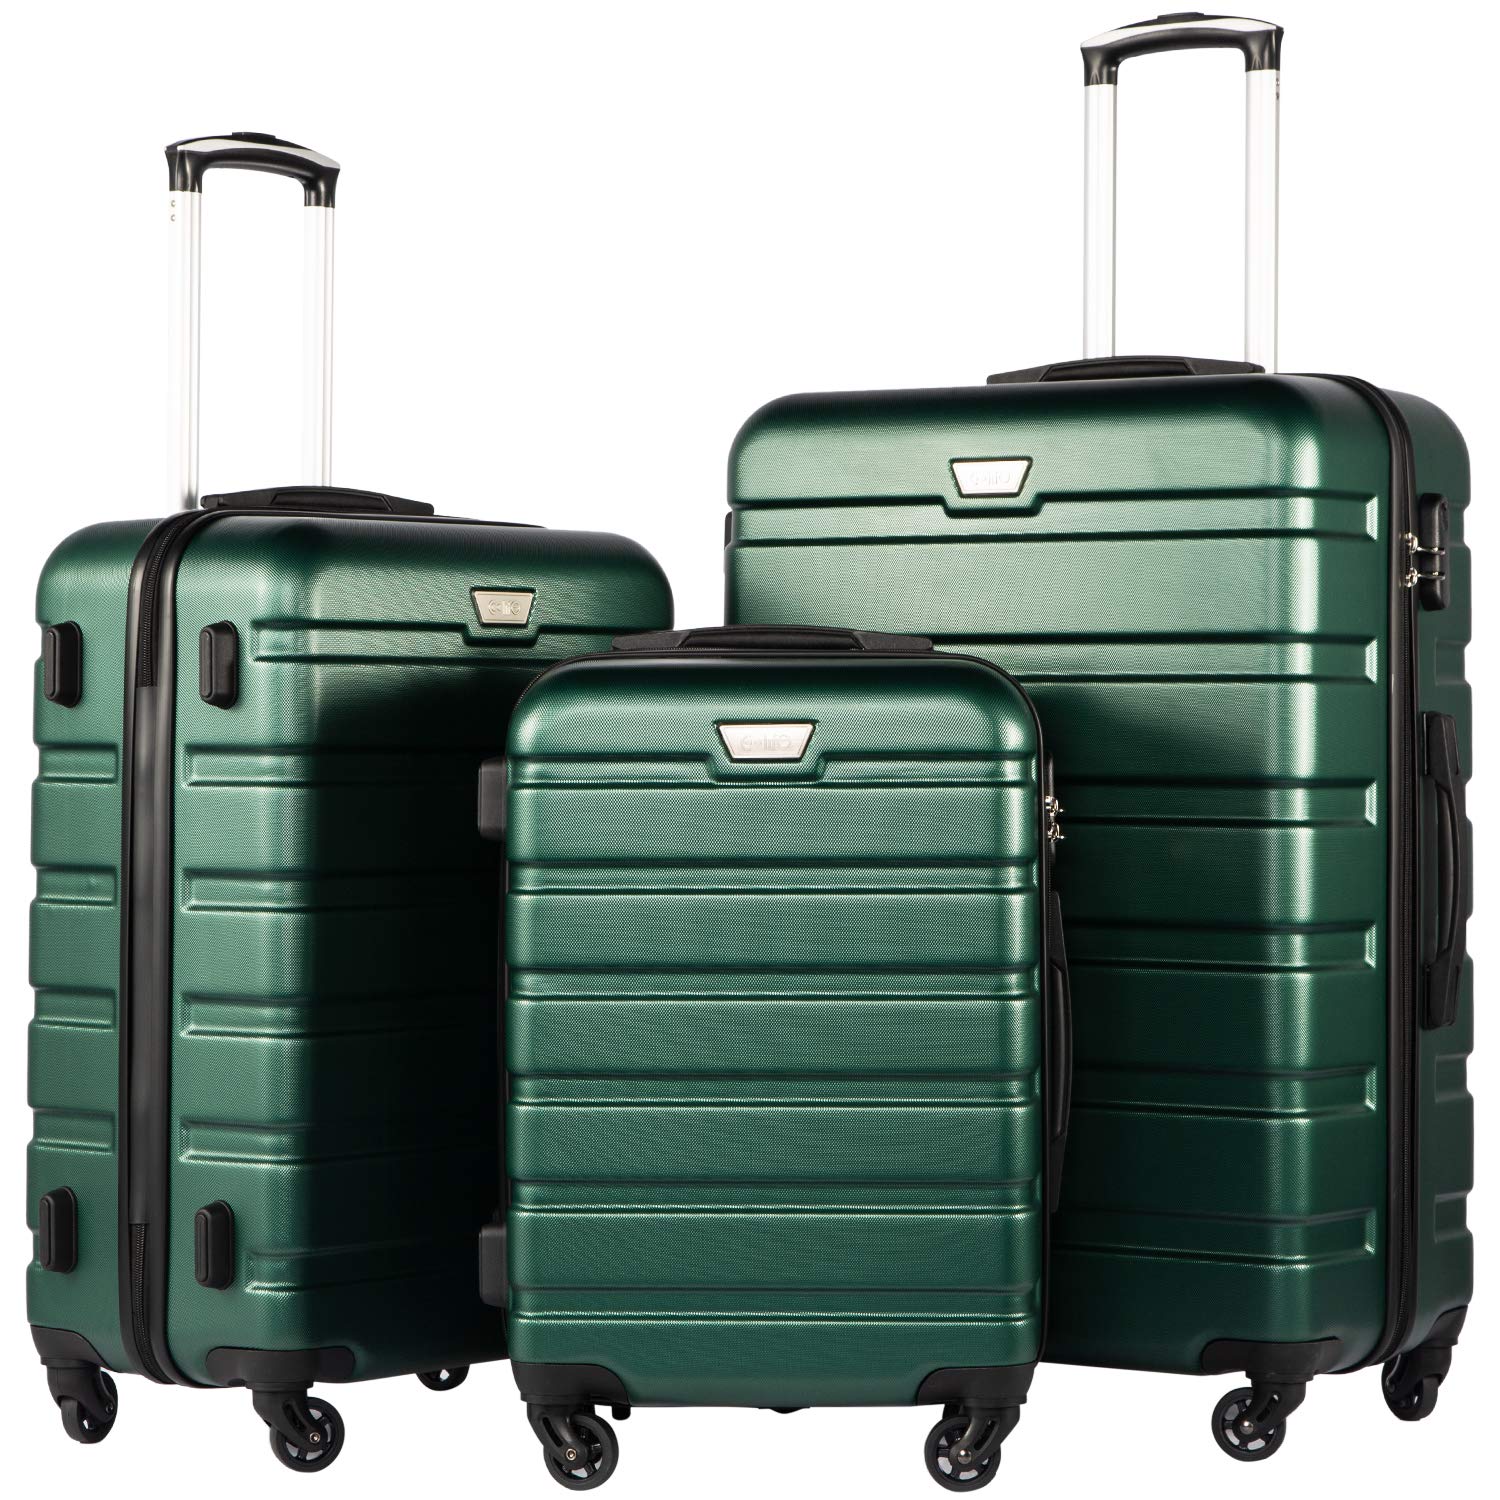 Hardside Carry On Spinner Suitcase Tan - Made By Design™